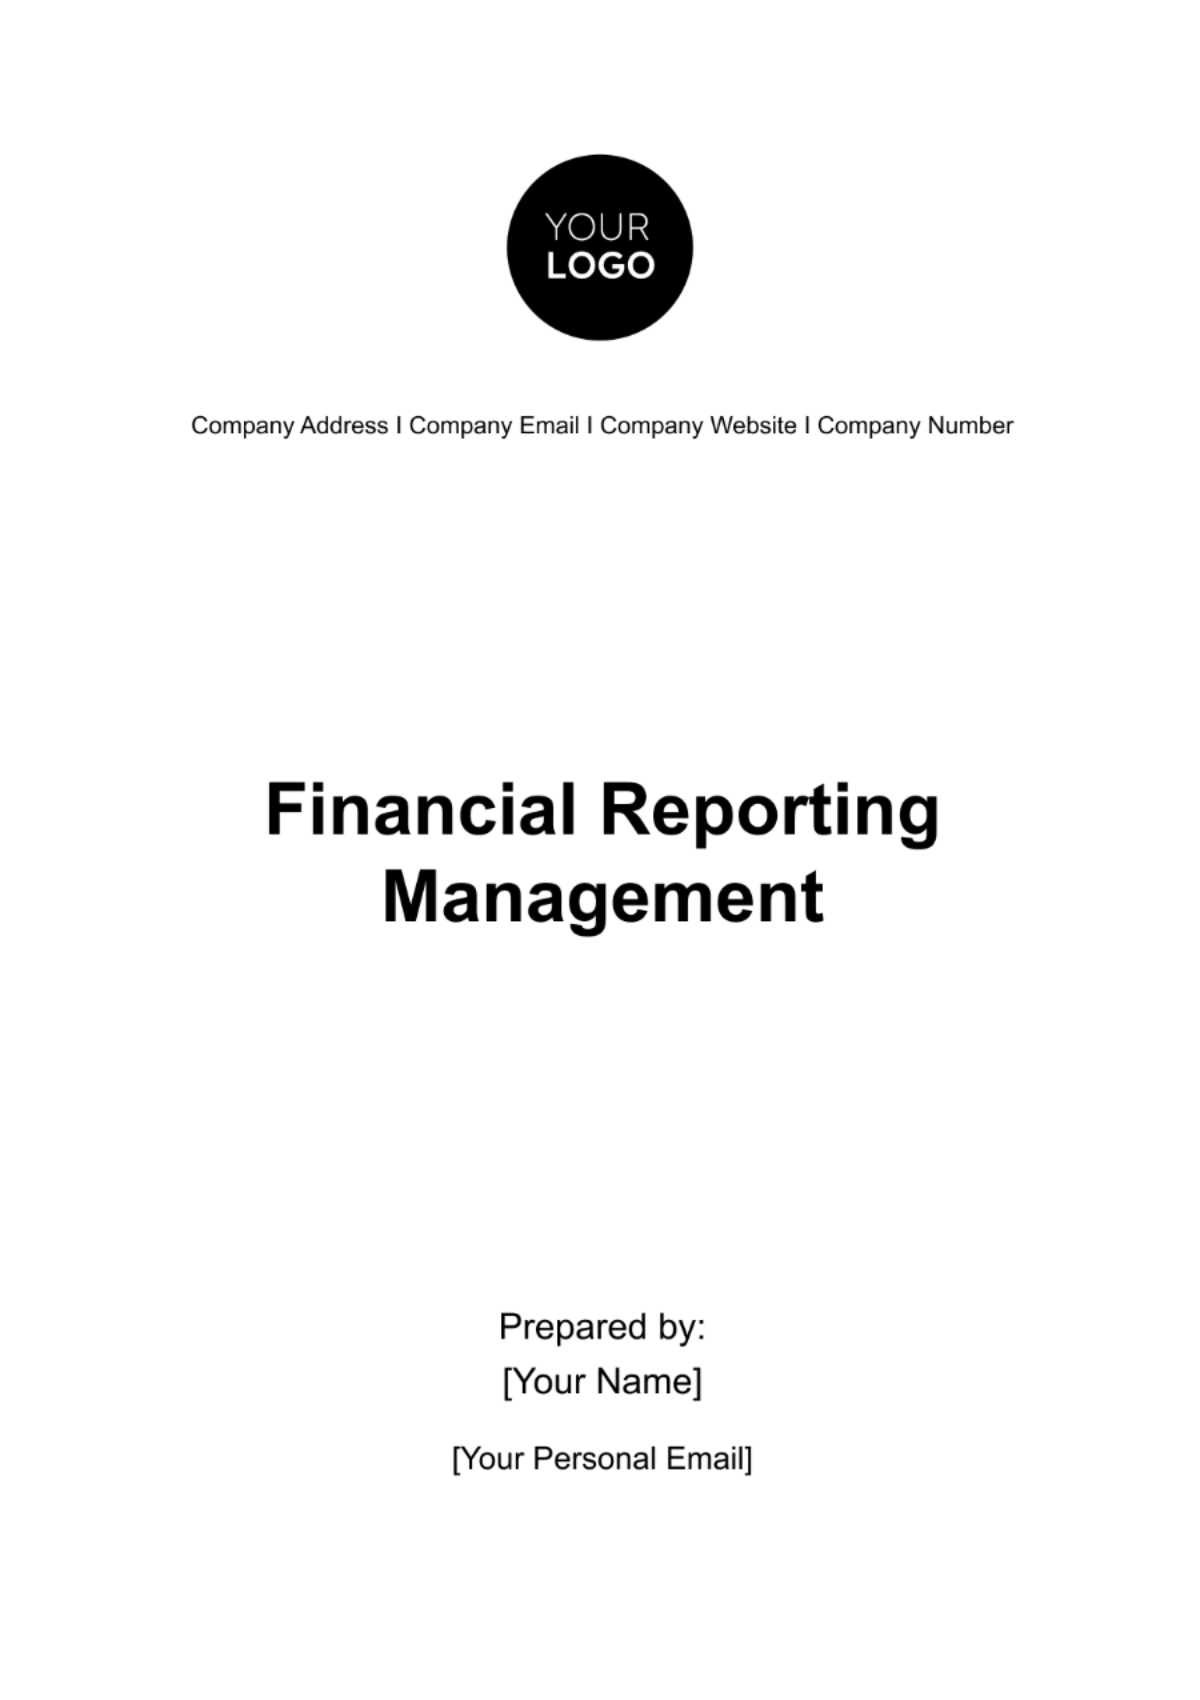 Free Financial Reporting Management Template